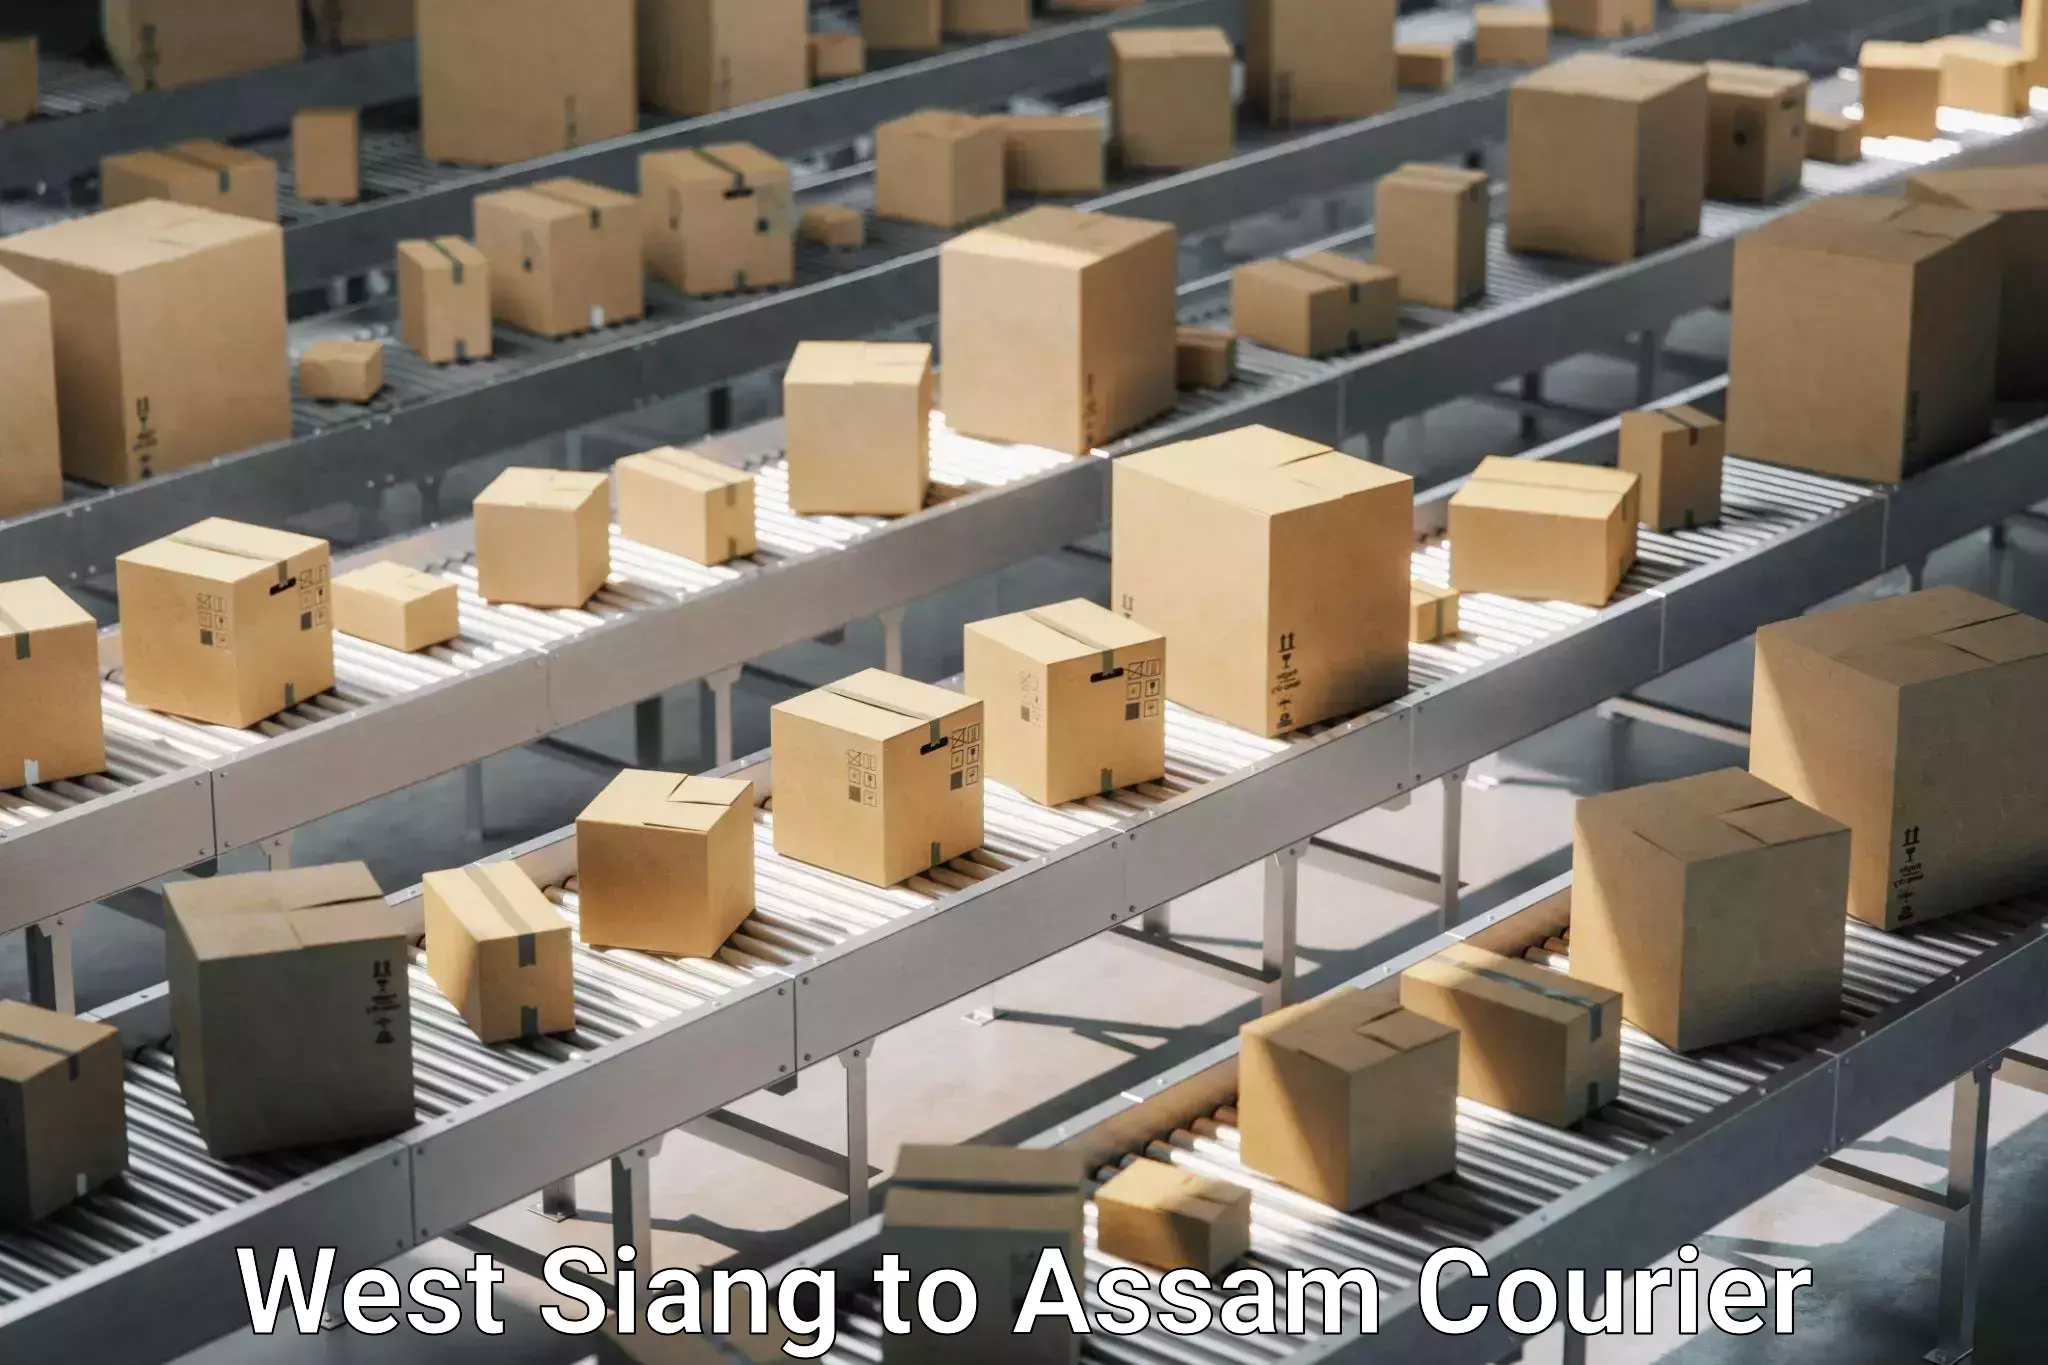 Quality relocation assistance West Siang to Assam